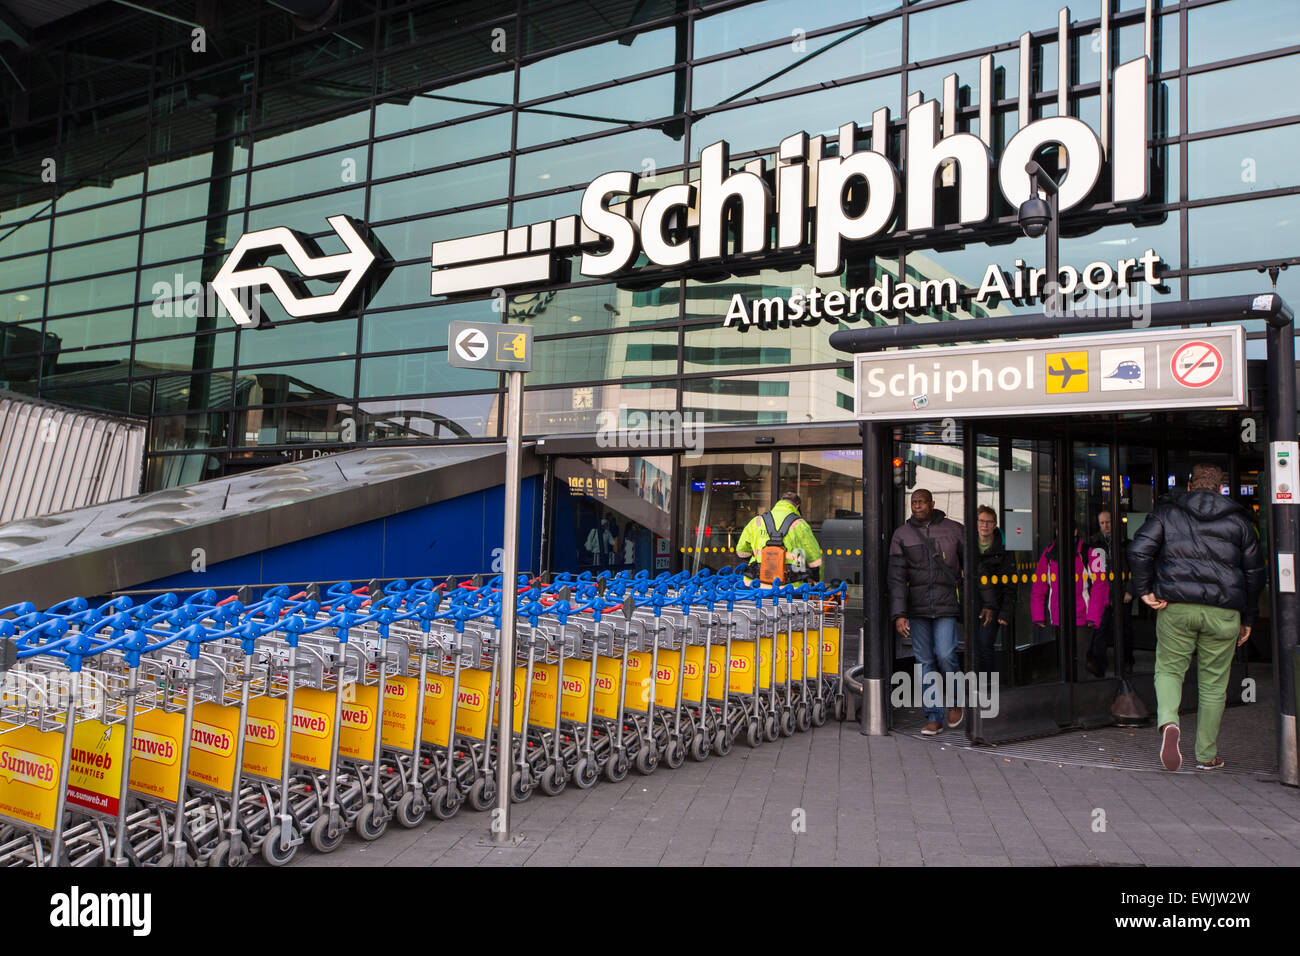 Schiphol airport in Amsterdam, Holland. Stock Photo